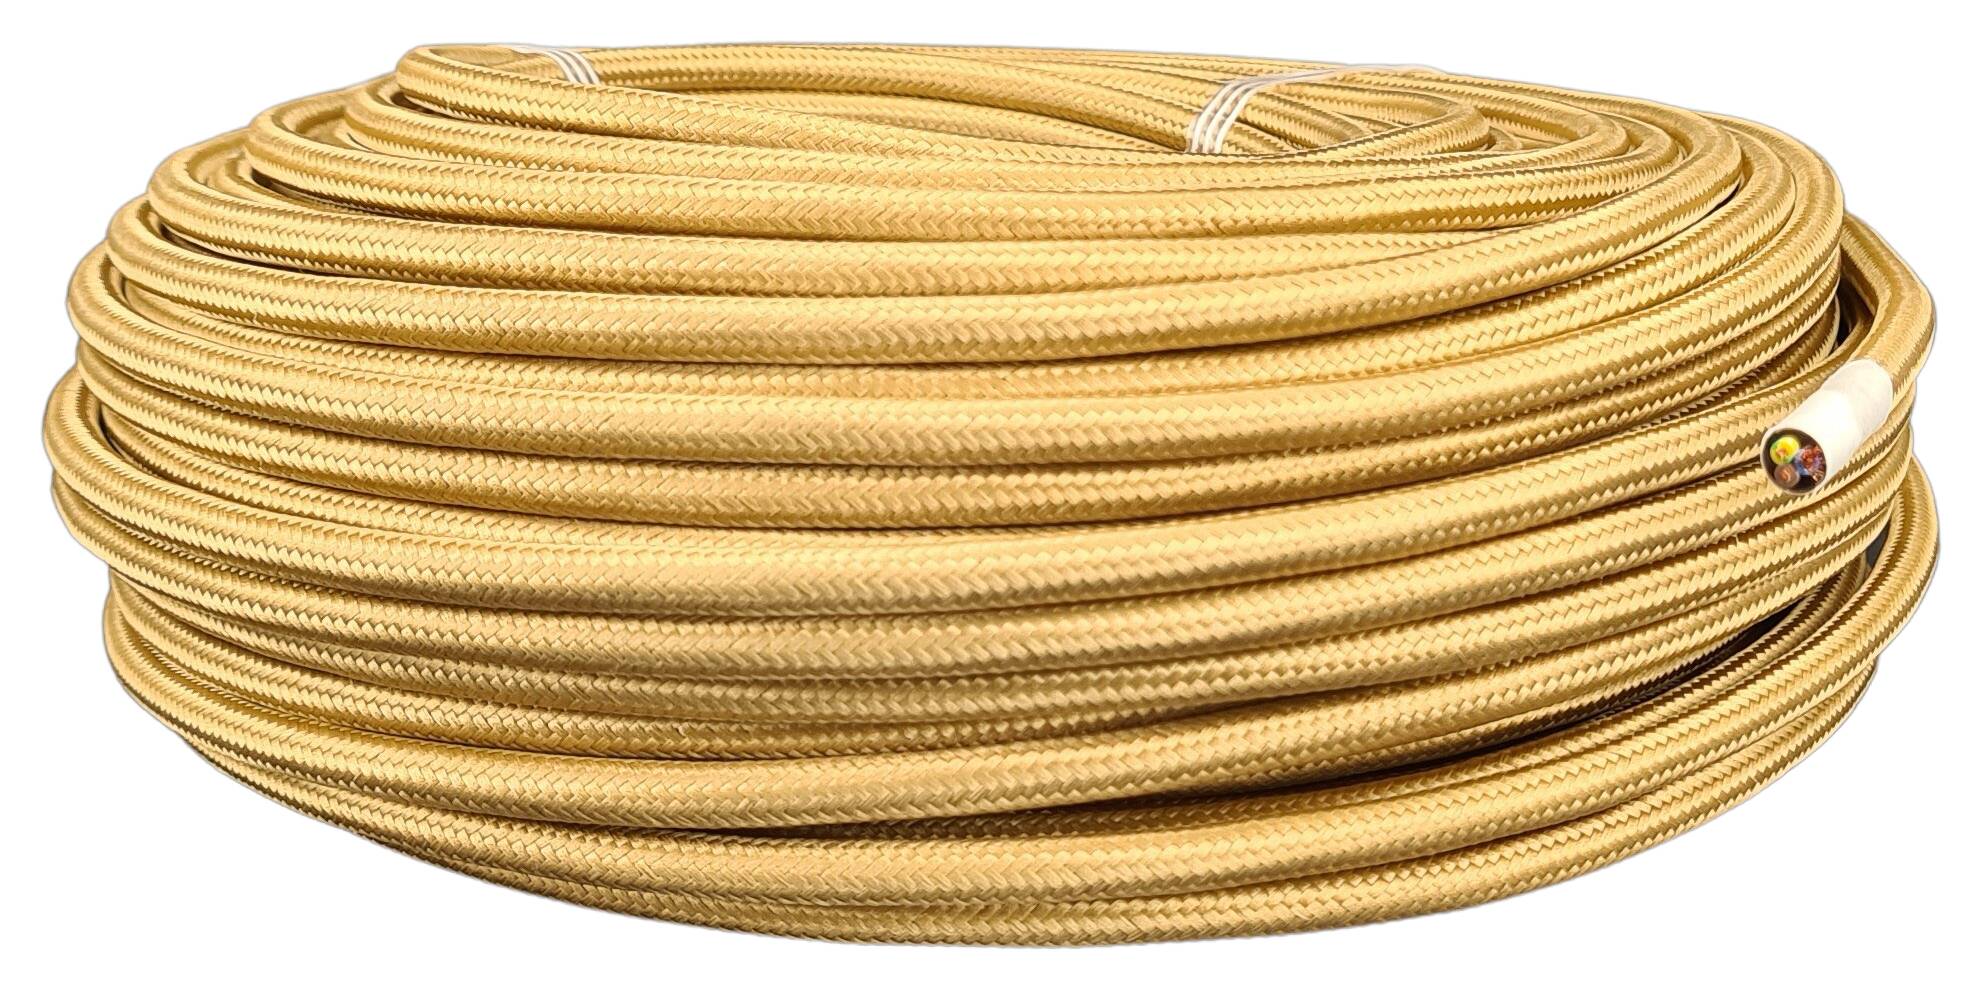 cable 3x 0,75 H03VV-F textile braided RAL 1036 gold